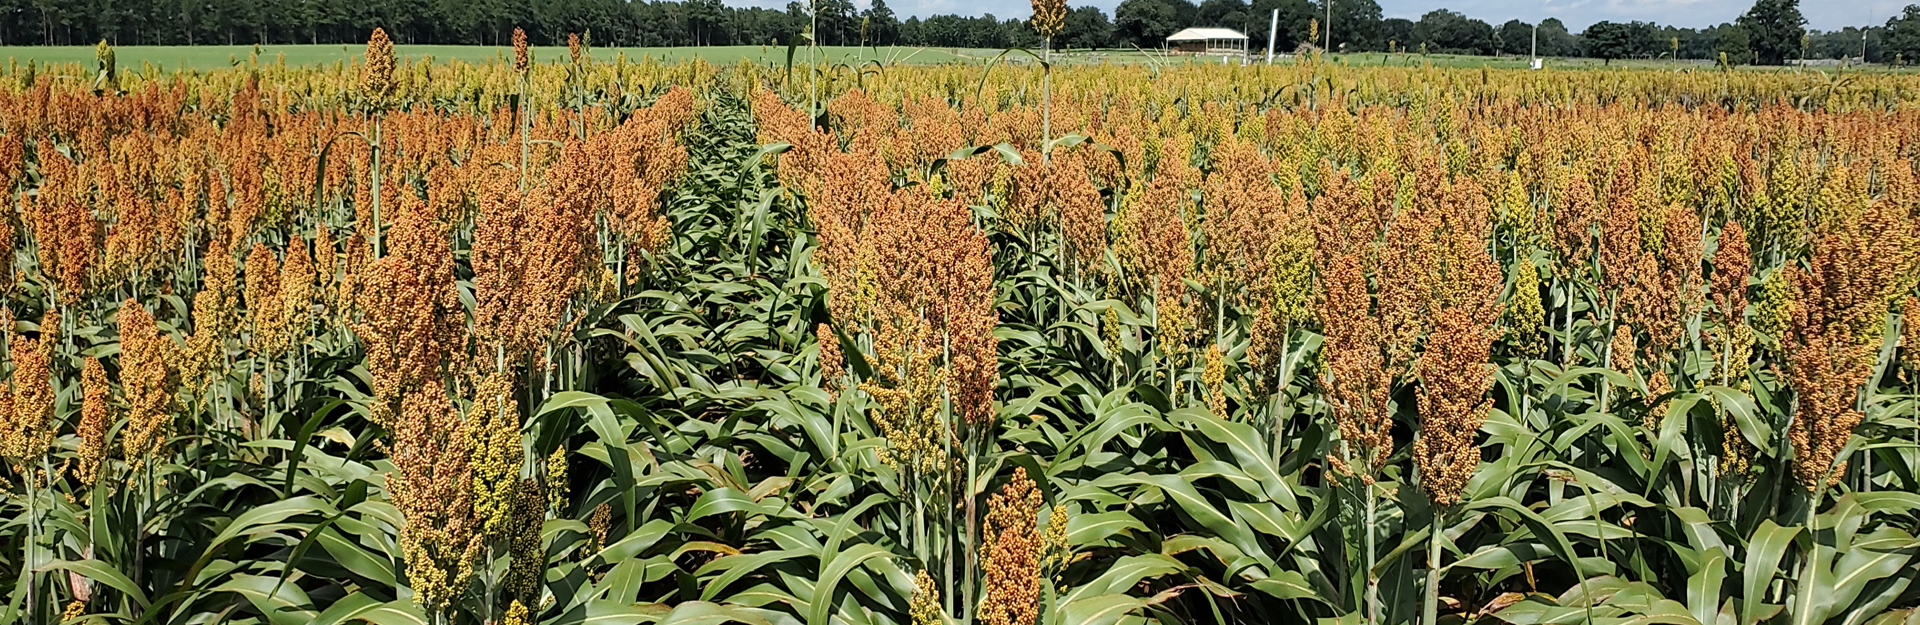 grain sorghum plants in row crops with silos in the background